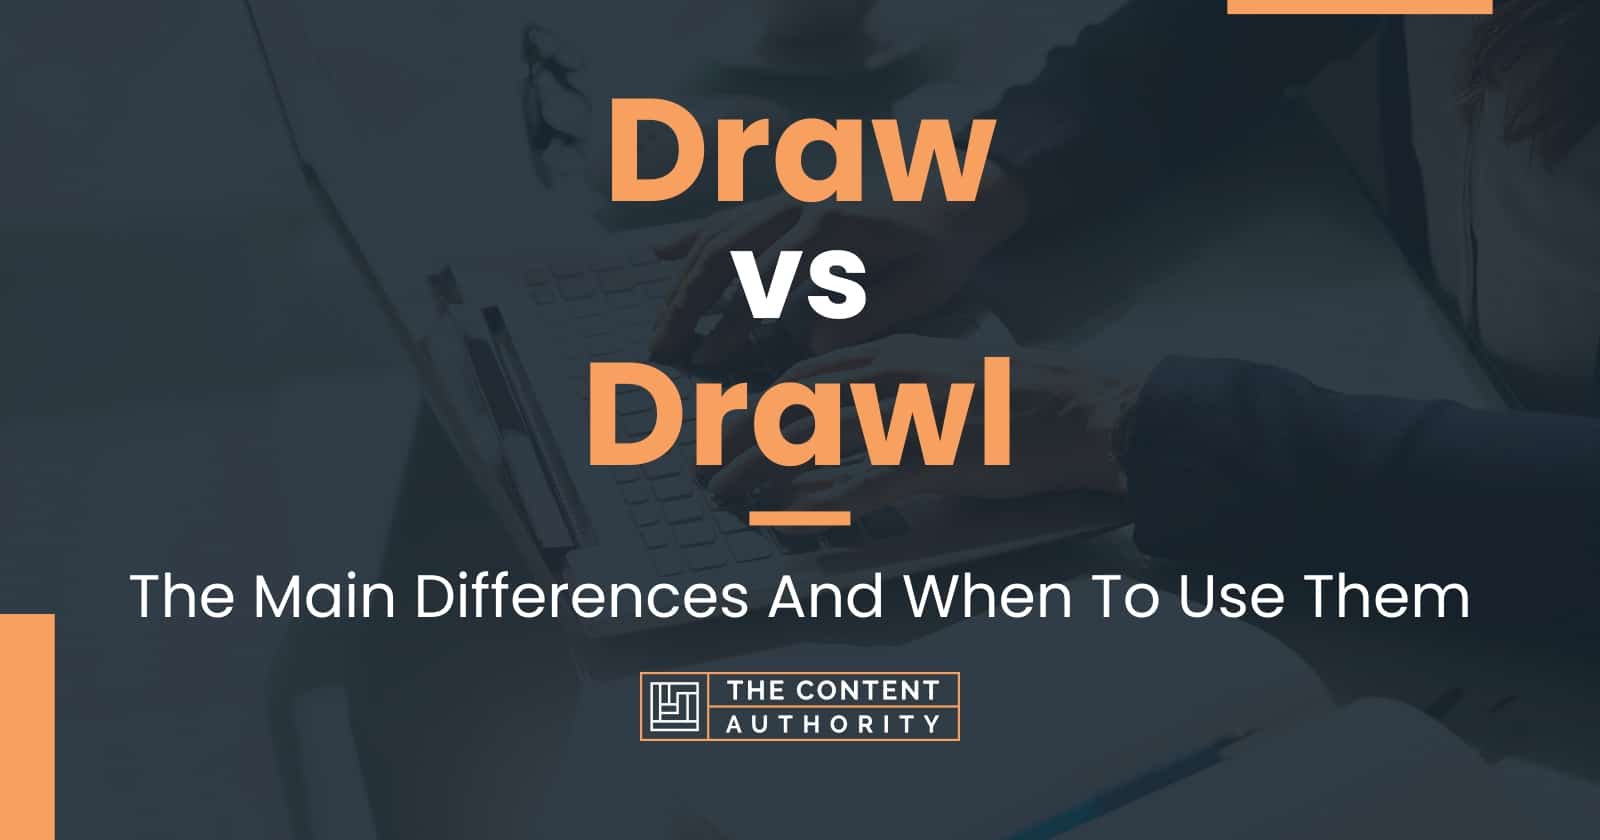 Draw vs Drawl The Main Differences And When To Use Them